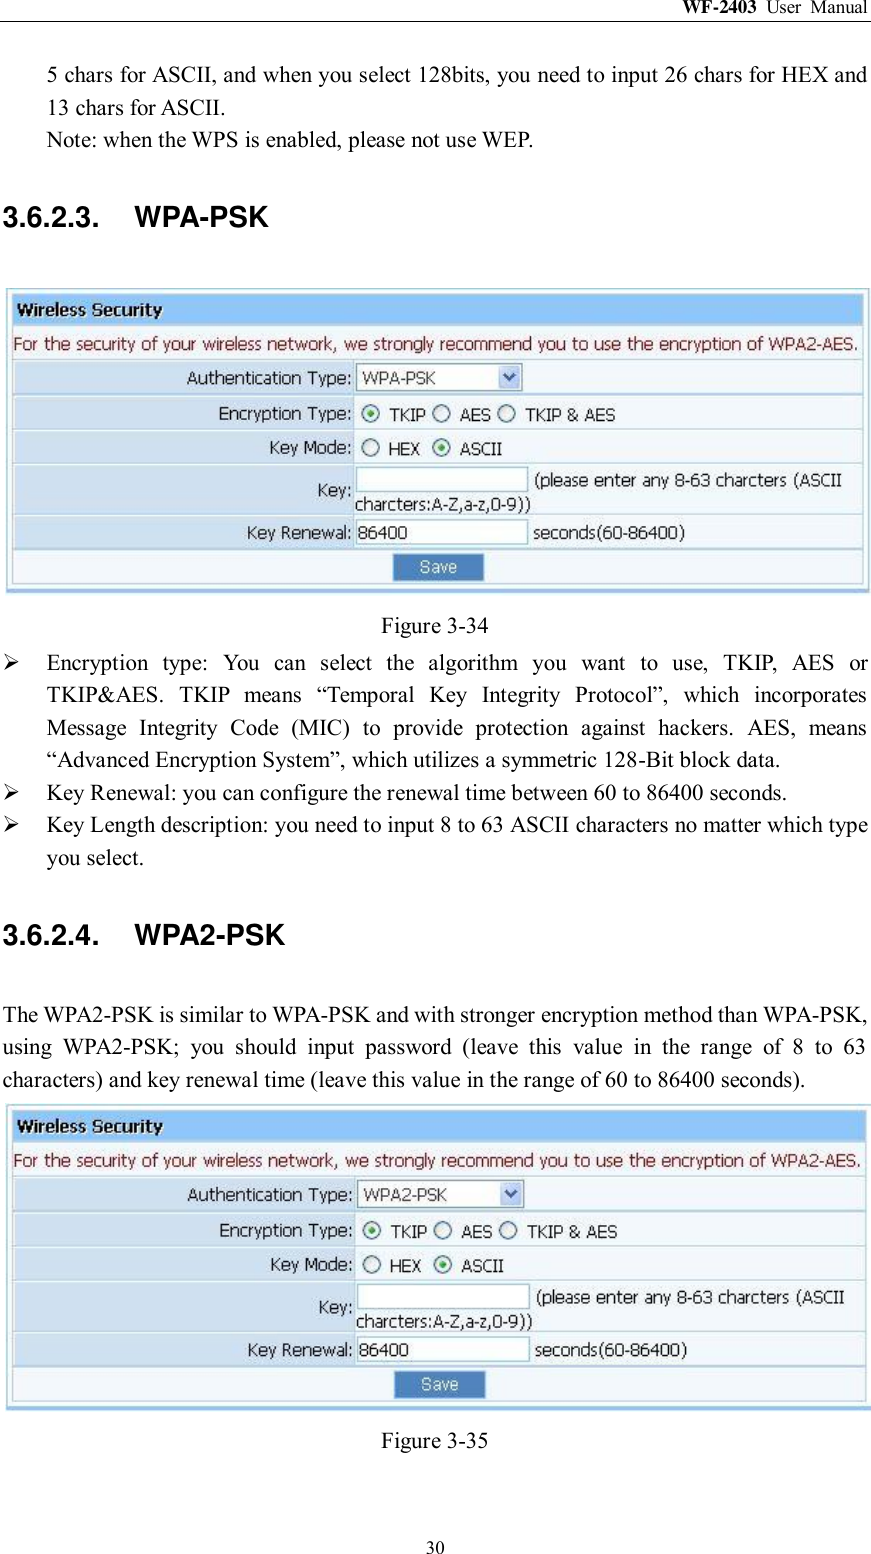 WF-2403  User  Manual  30 5 chars for ASCII, and when you select 128bits, you need to input 26 chars for HEX and 13 chars for ASCII. Note: when the WPS is enabled, please not use WEP. 3.6.2.3.  WPA-PSK  Figure 3-34  Encryption  type:  You  can  select  the  algorithm  you  want  to  use,  TKIP,  AES  or TKIP&amp;AES.  TKIP  means  “Temporal  Key  Integrity  Protocol”,  which  incorporates Message  Integrity  Code  (MIC)  to  provide  protection  against  hackers.  AES,  means “Advanced Encryption System”, which utilizes a symmetric 128-Bit block data.  Key Renewal: you can configure the renewal time between 60 to 86400 seconds.  Key Length description: you need to input 8 to 63 ASCII characters no matter which type you select. 3.6.2.4.  WPA2-PSK The WPA2-PSK is similar to WPA-PSK and with stronger encryption method than WPA-PSK, using  WPA2-PSK;  you  should  input  password  (leave  this  value  in  the  range  of  8  to  63 characters) and key renewal time (leave this value in the range of 60 to 86400 seconds).  Figure 3-35 